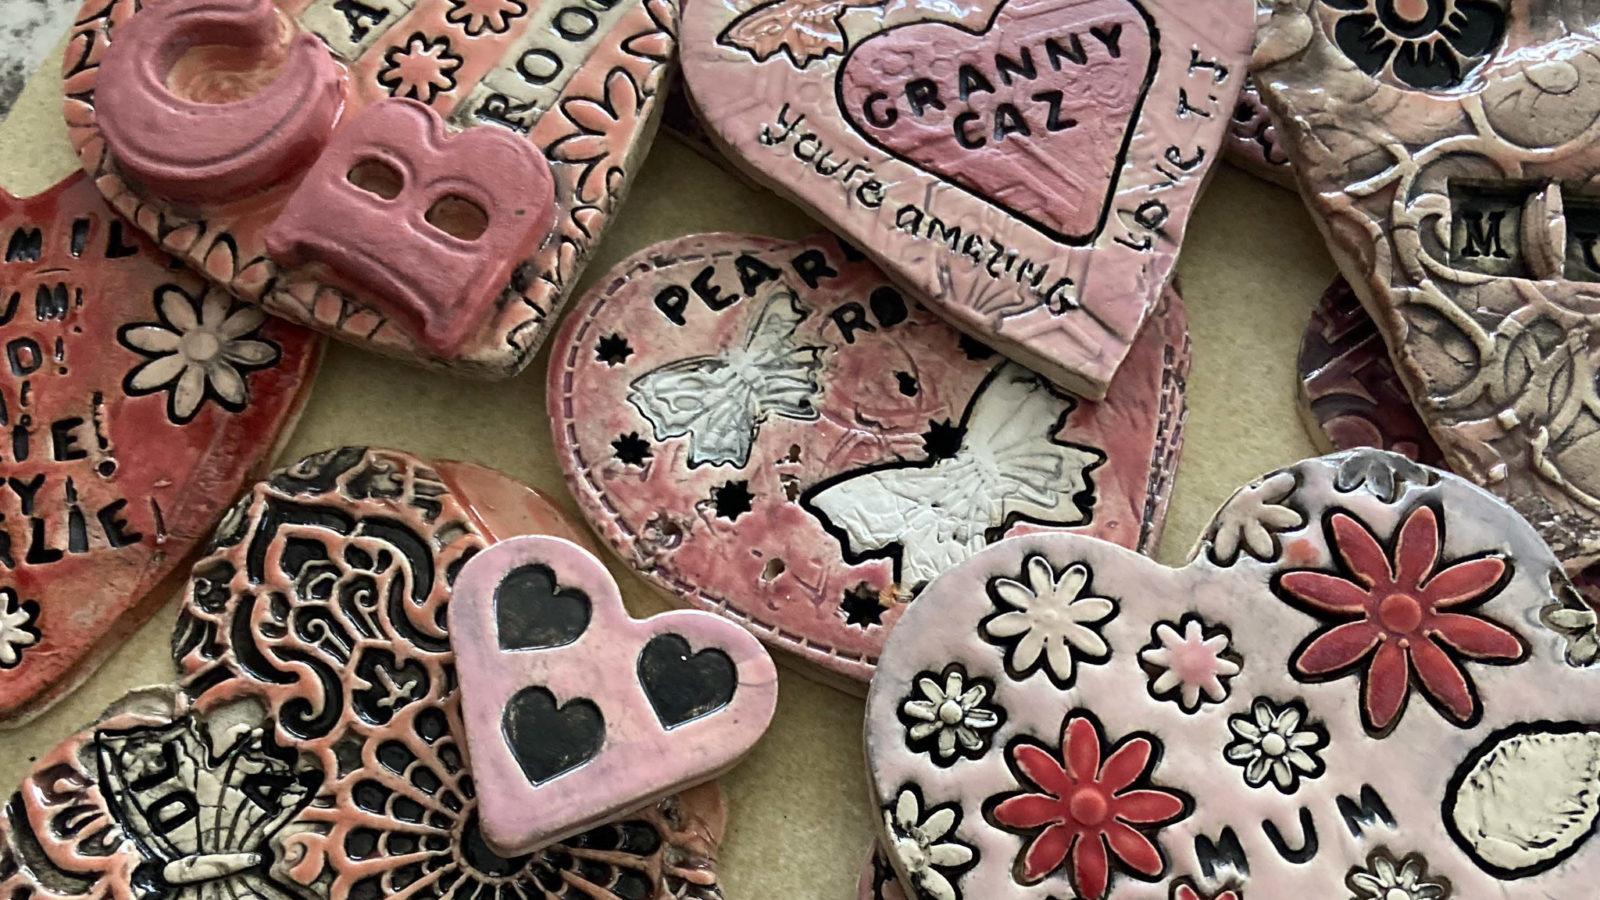 A selection of glazed clay hearts in varieties of pinks and reds, with engravings and writing on them, are laid out on a surface.